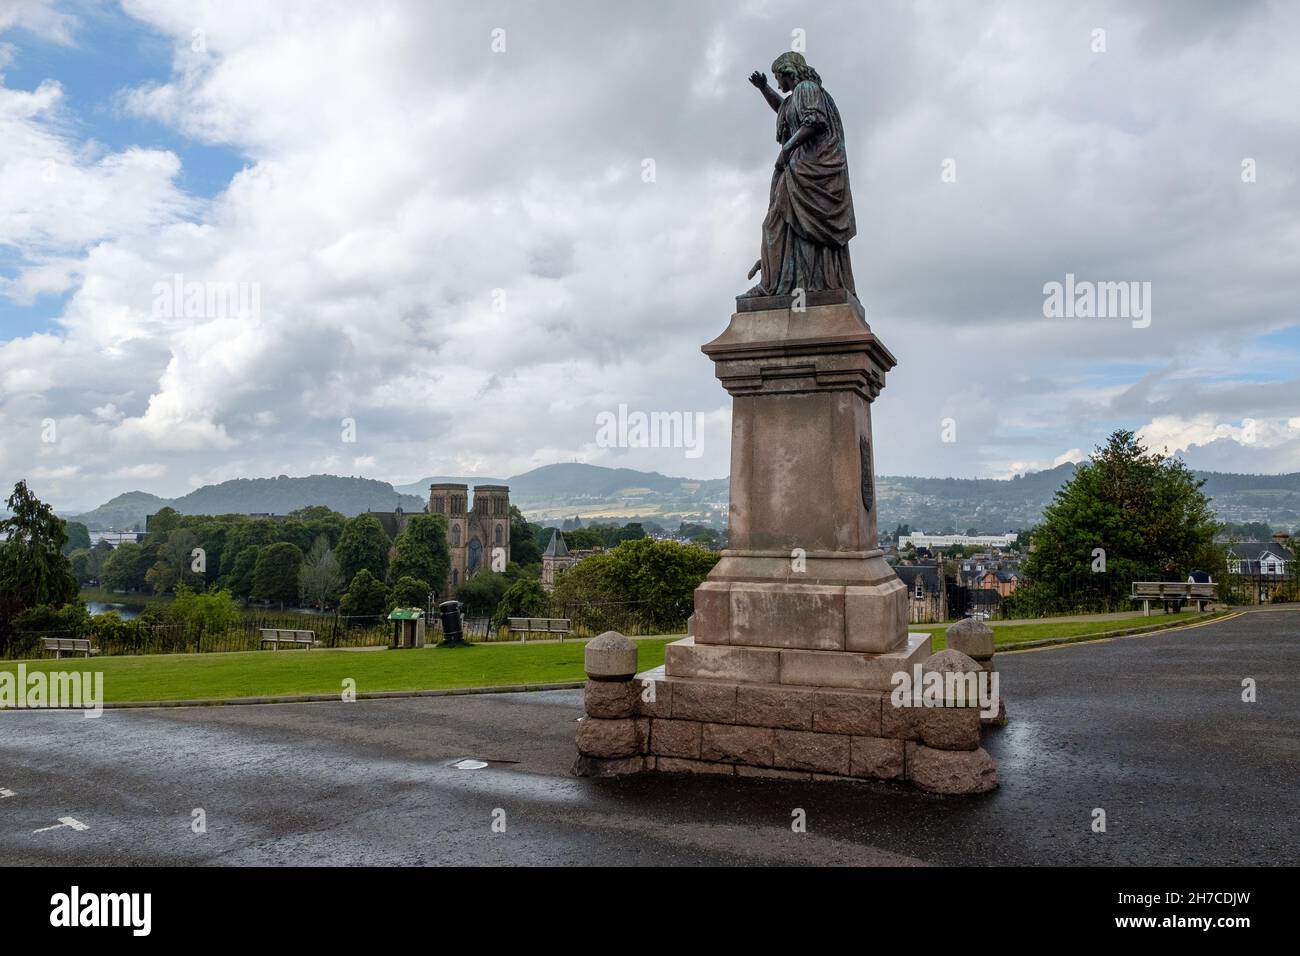 Statue of Flora Macdonald outside Inverness Castle, Inverness cathedral in the background, between rain showers Stock Photo